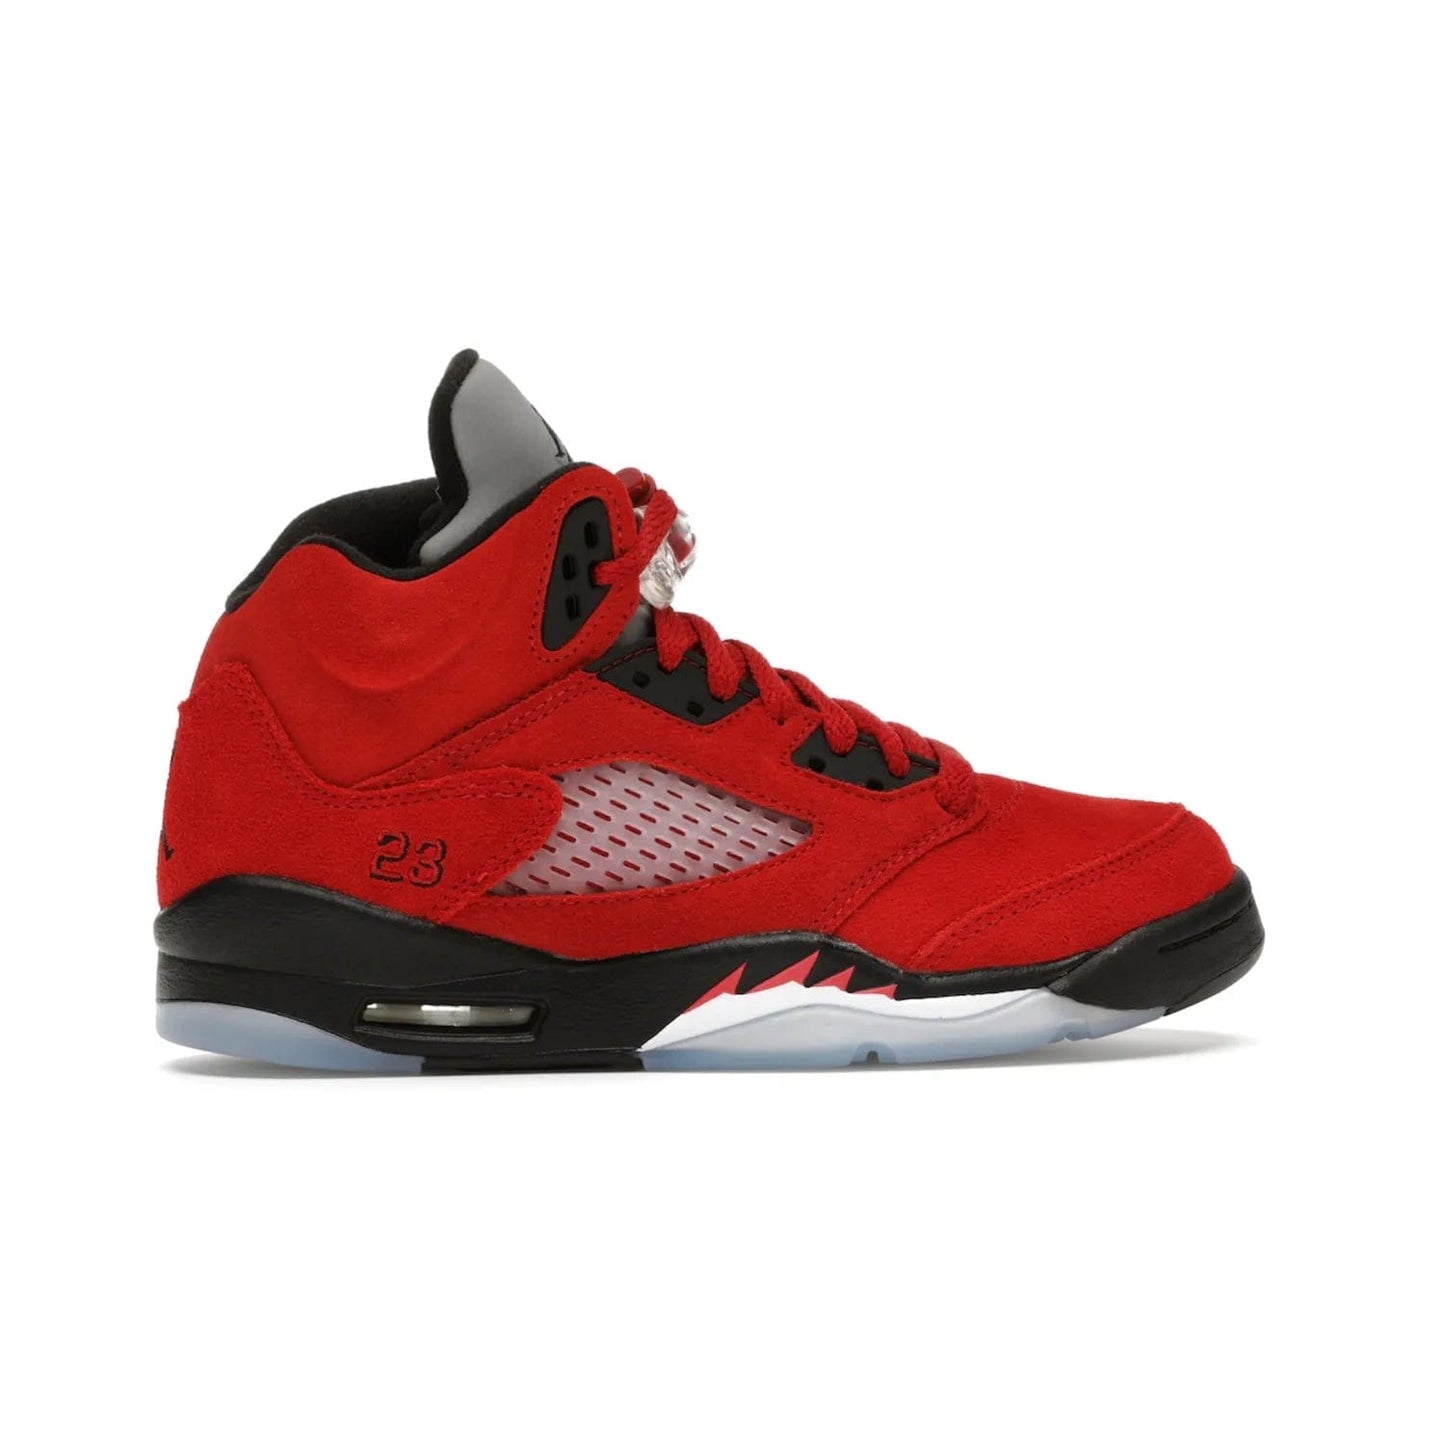 Jordan 5 Retro Raging Bull Red (2021) (GS) - Image 36 - Only at www.BallersClubKickz.com - Jordan 5 Retro Raging Bulls Red 2021 GS. Varsity Red suede upper with embroidered number 23, black leather detail, red laces, and midsole with air cushioning. Jumpman logos on tongue, heel, and outsole. On-trend streetwear and basketball style. Released April 10, 2021.